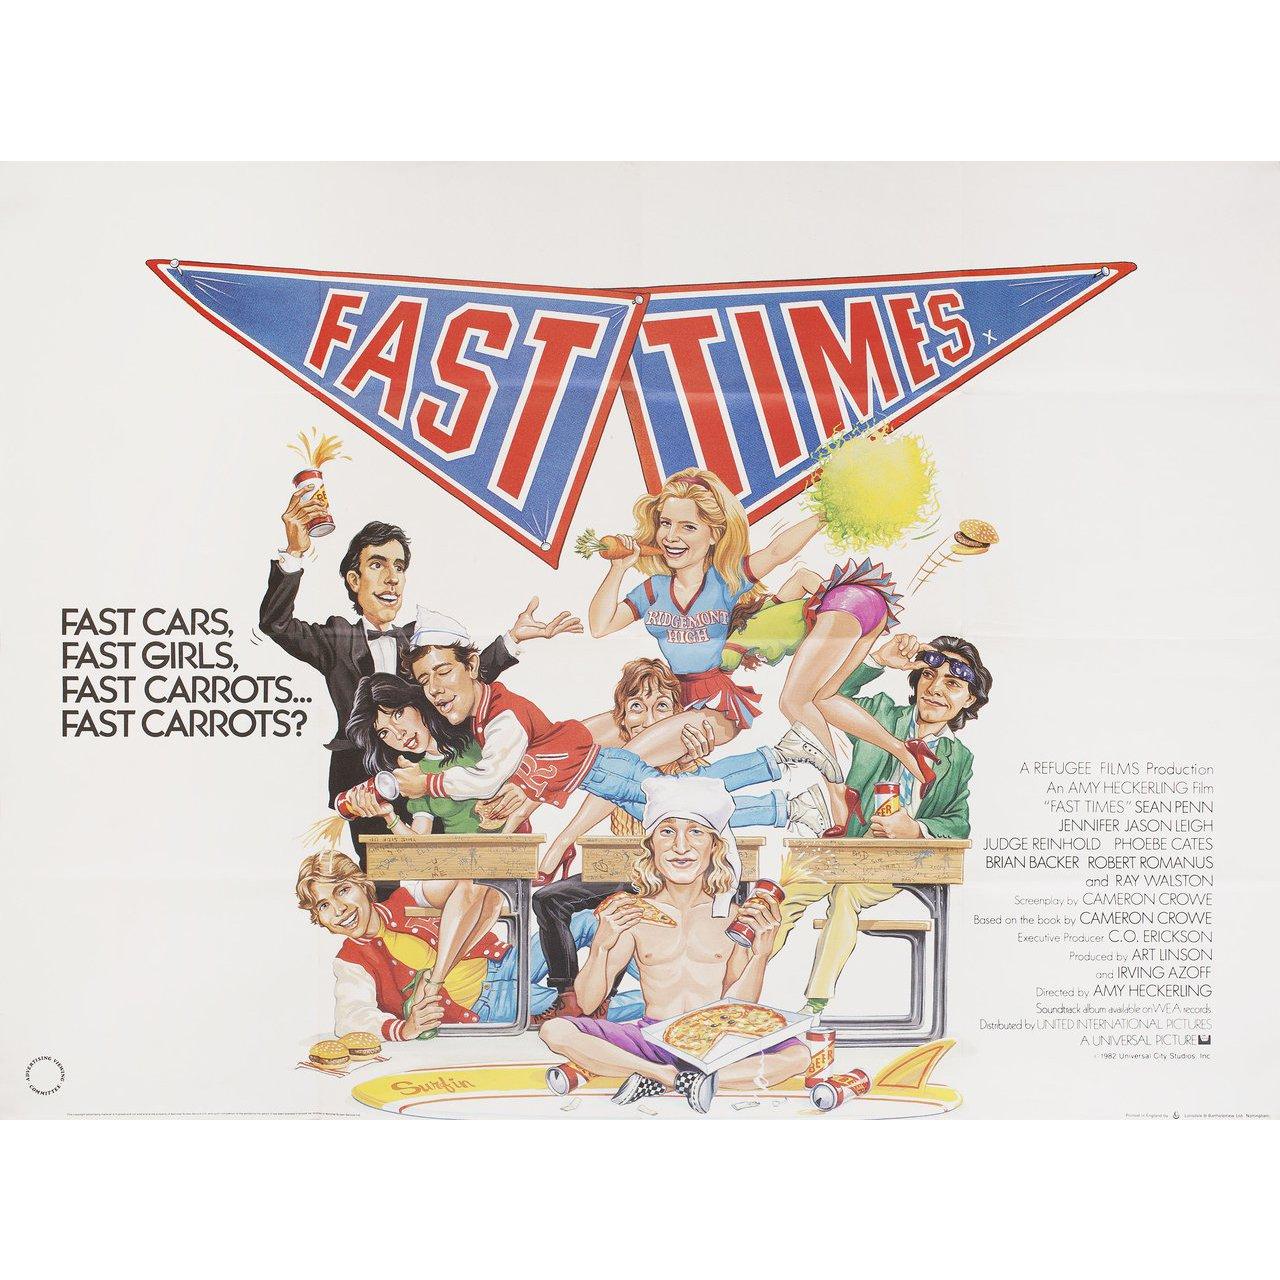 Original 1982 British quad poster for the film Fast Times at Ridgemont High directed by Amy Heckerling with Sean Penn / Jennifer Jason Leigh / Judge Reinhold / Robert Romanus. Very Good-Fine condition, folded. Many original posters were issued